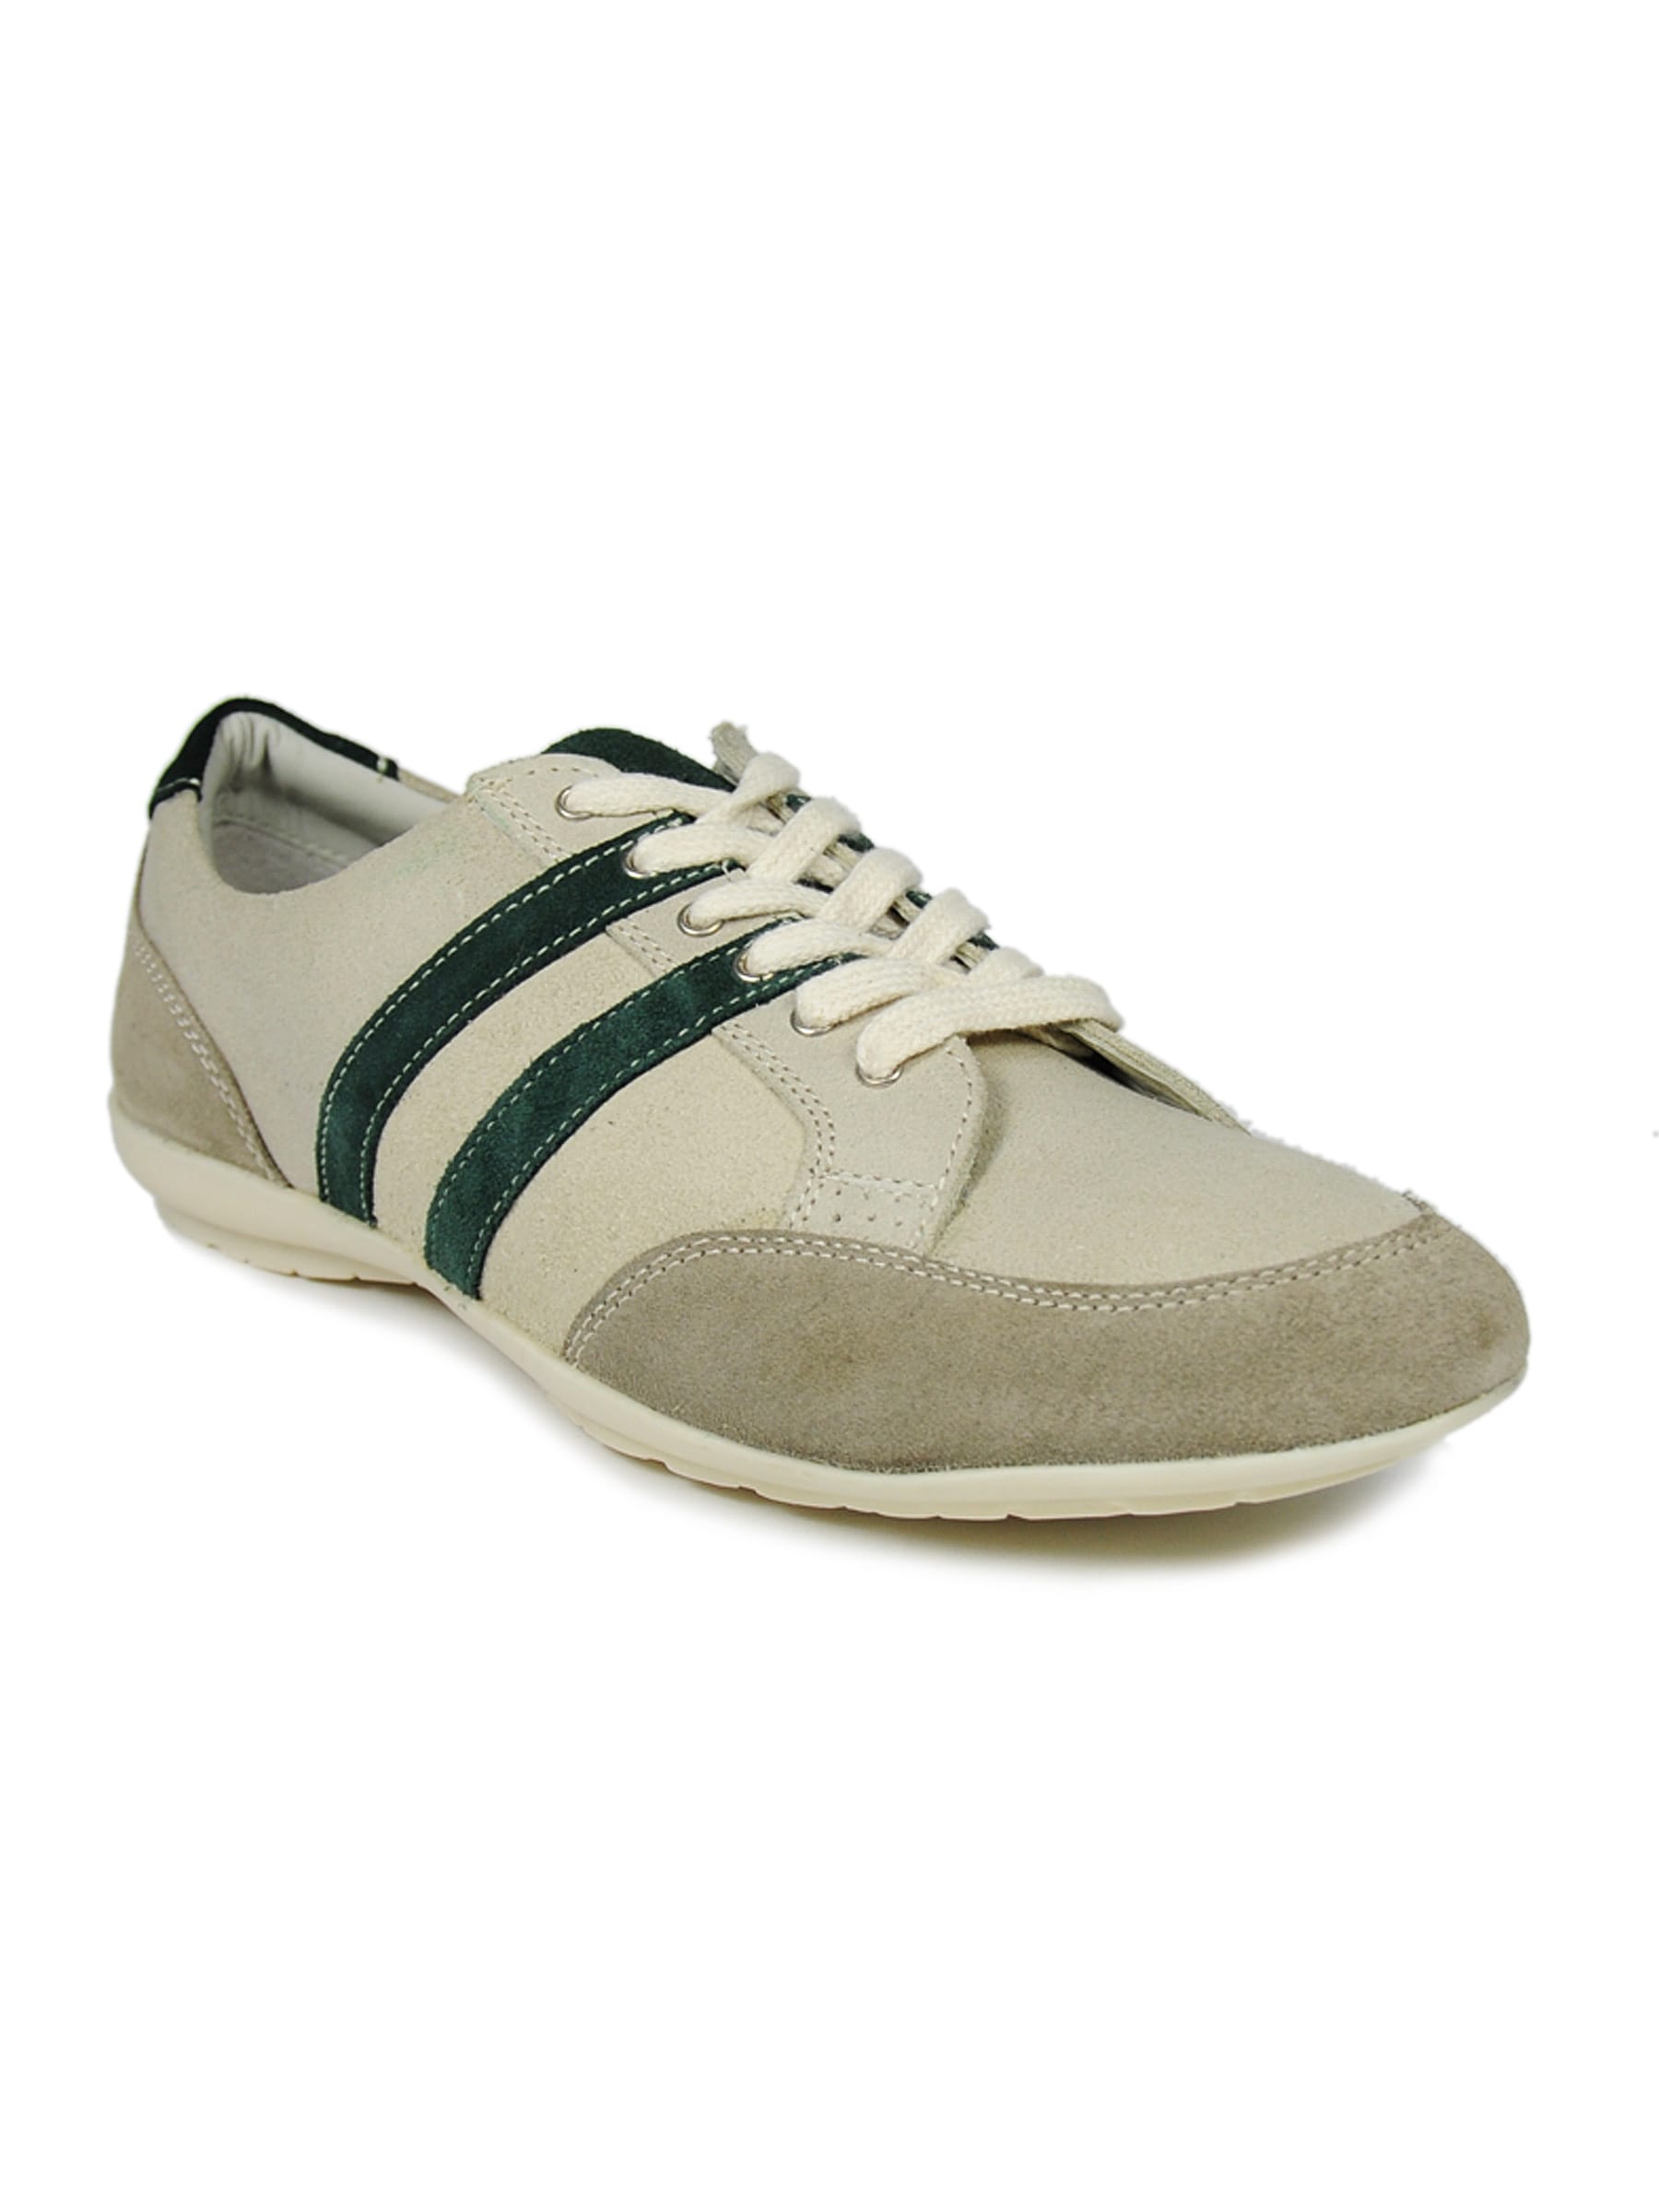 United Colors of Benetton Men Iceland Grey Casual Shoes